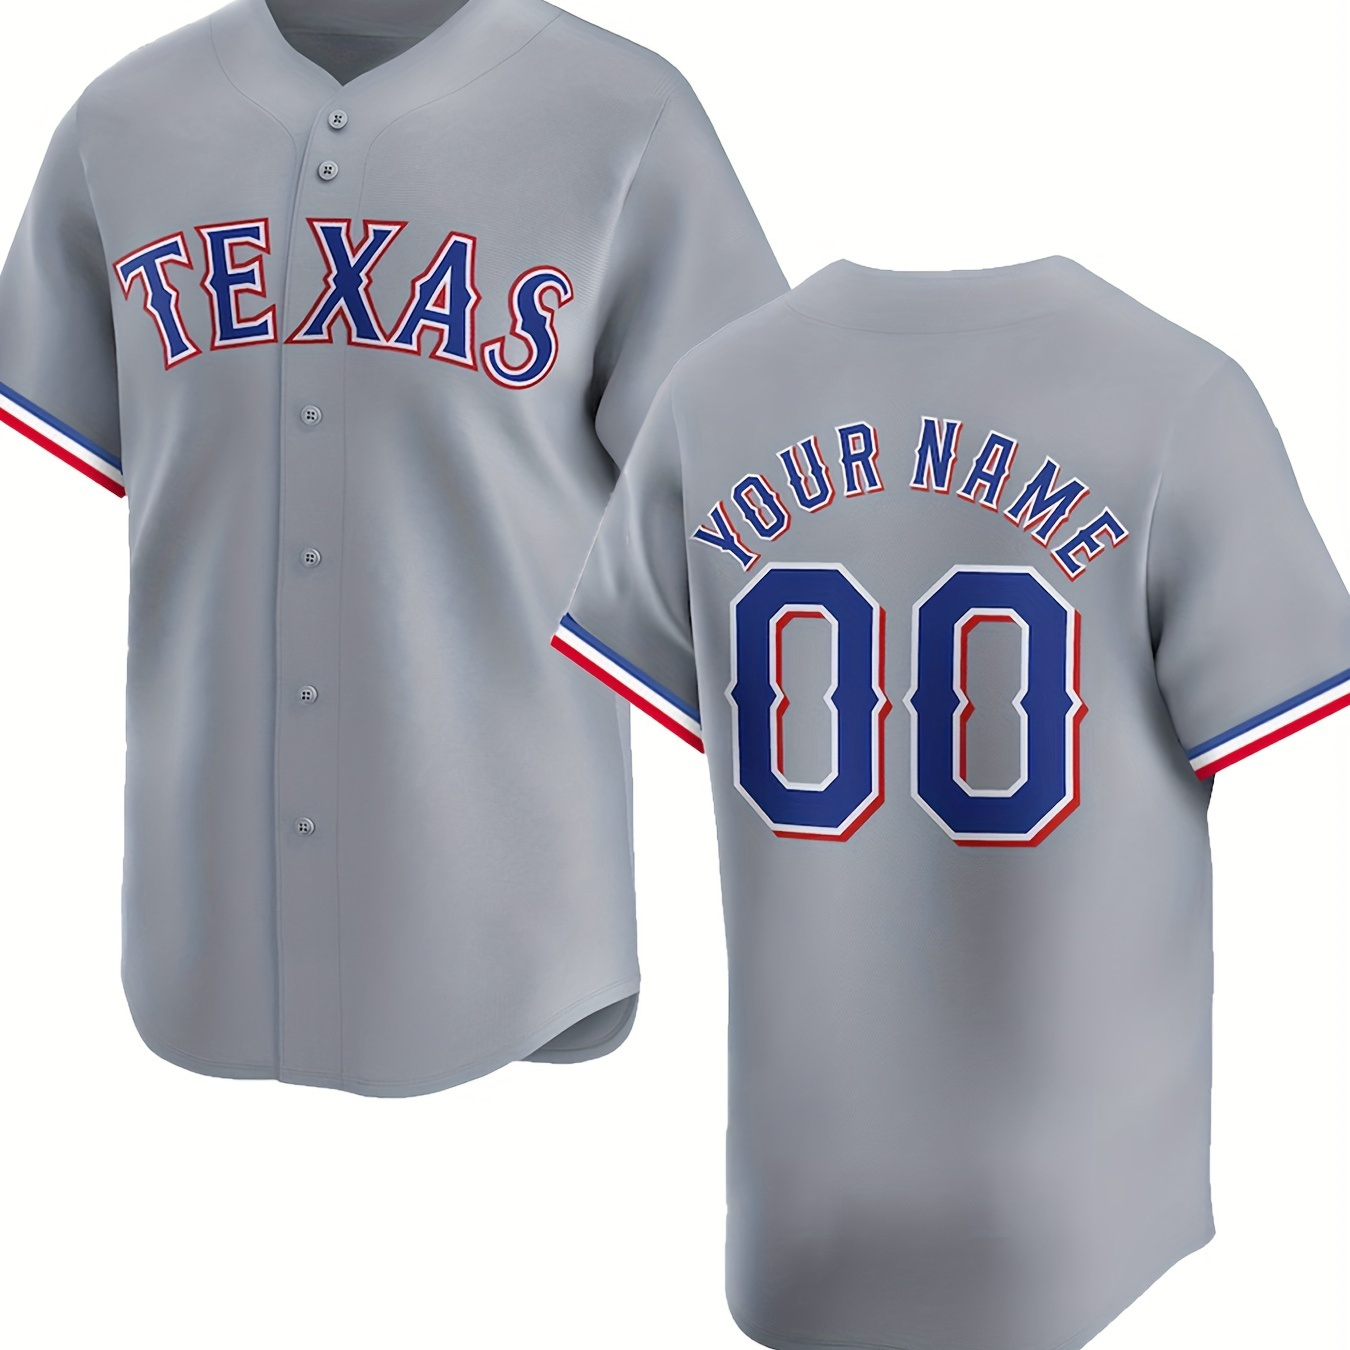 

Men's Customized Short Sleeve V-neck Baseball Jersey, Tailored To Your Preference, Comfy Top For Summer Sport